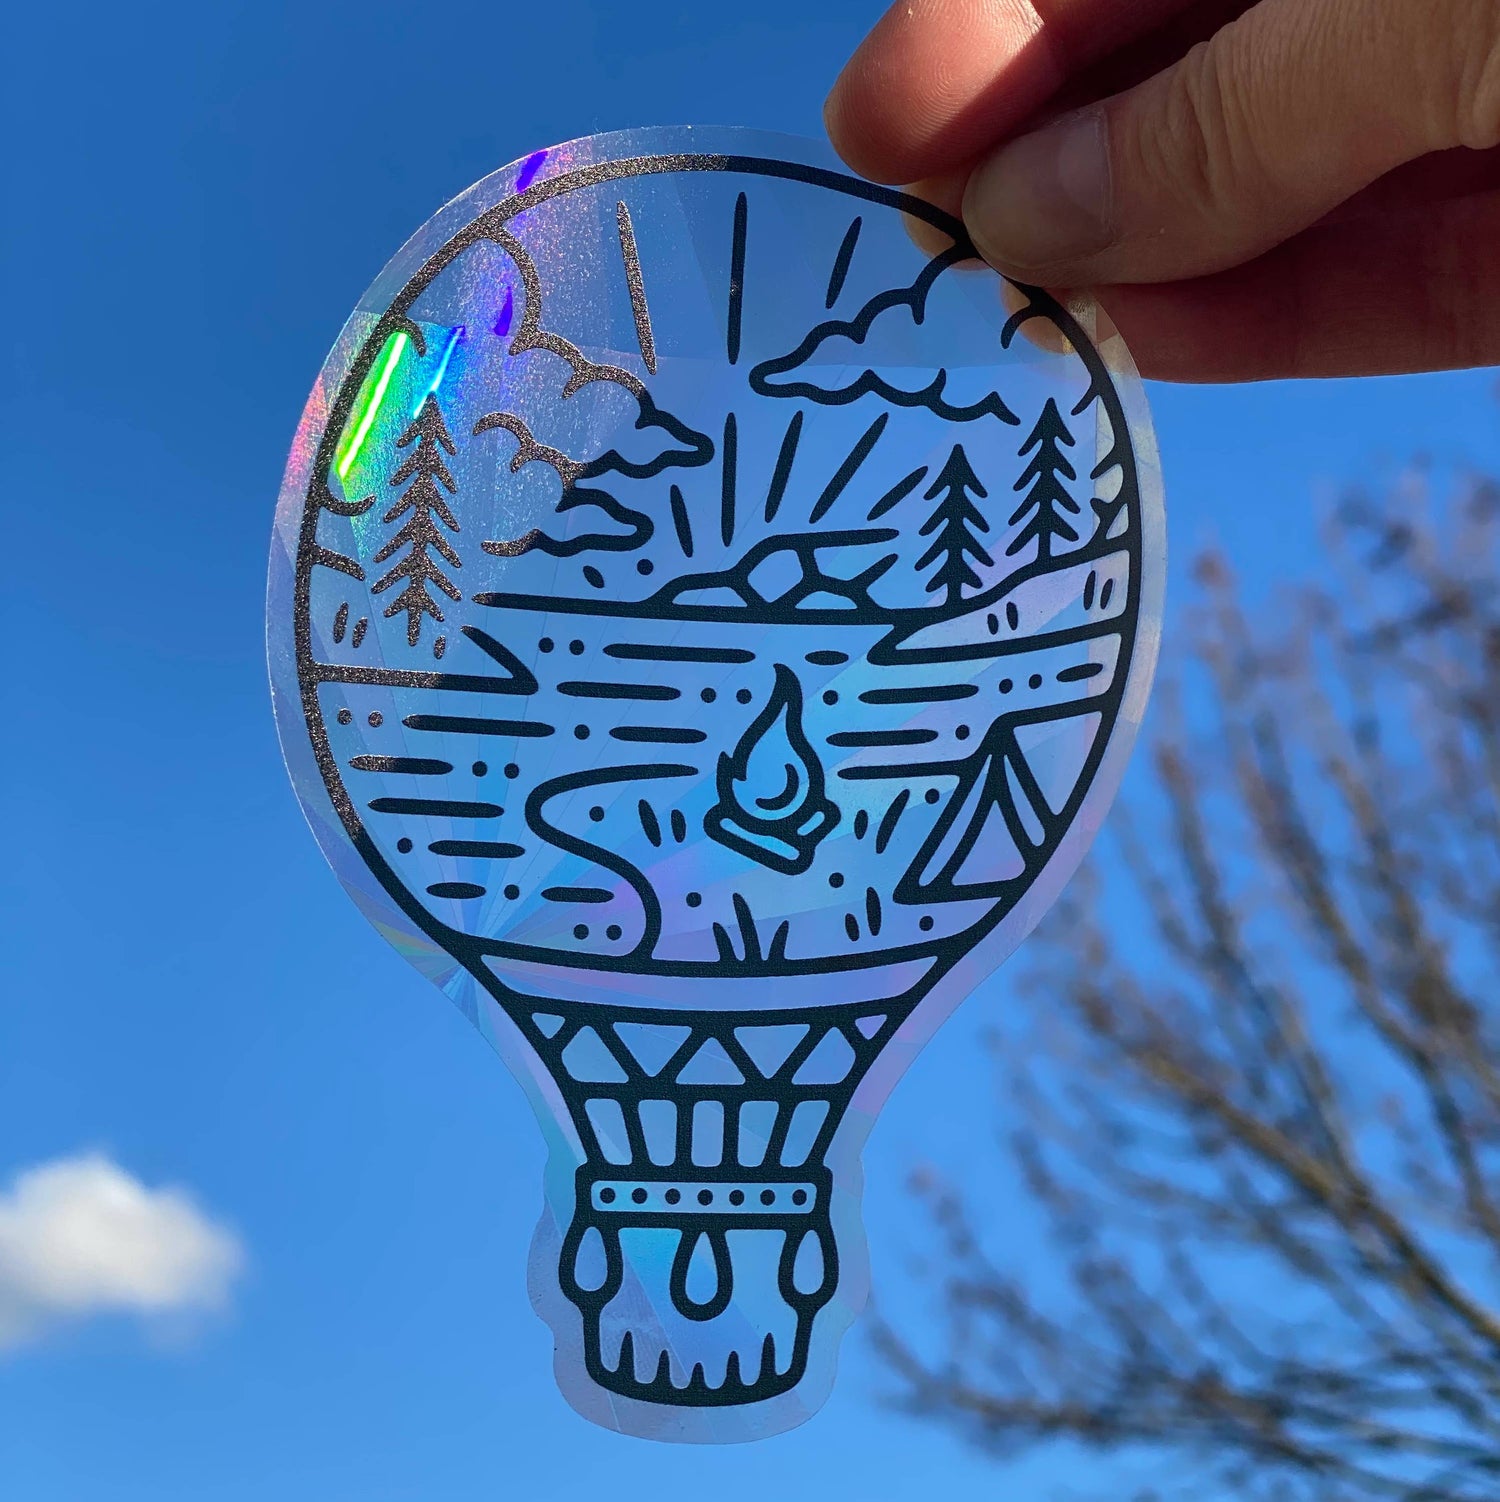 Hot Air Balloon shaped Suncatcher with mountain lake camping scene design by Good + Well Supply Co